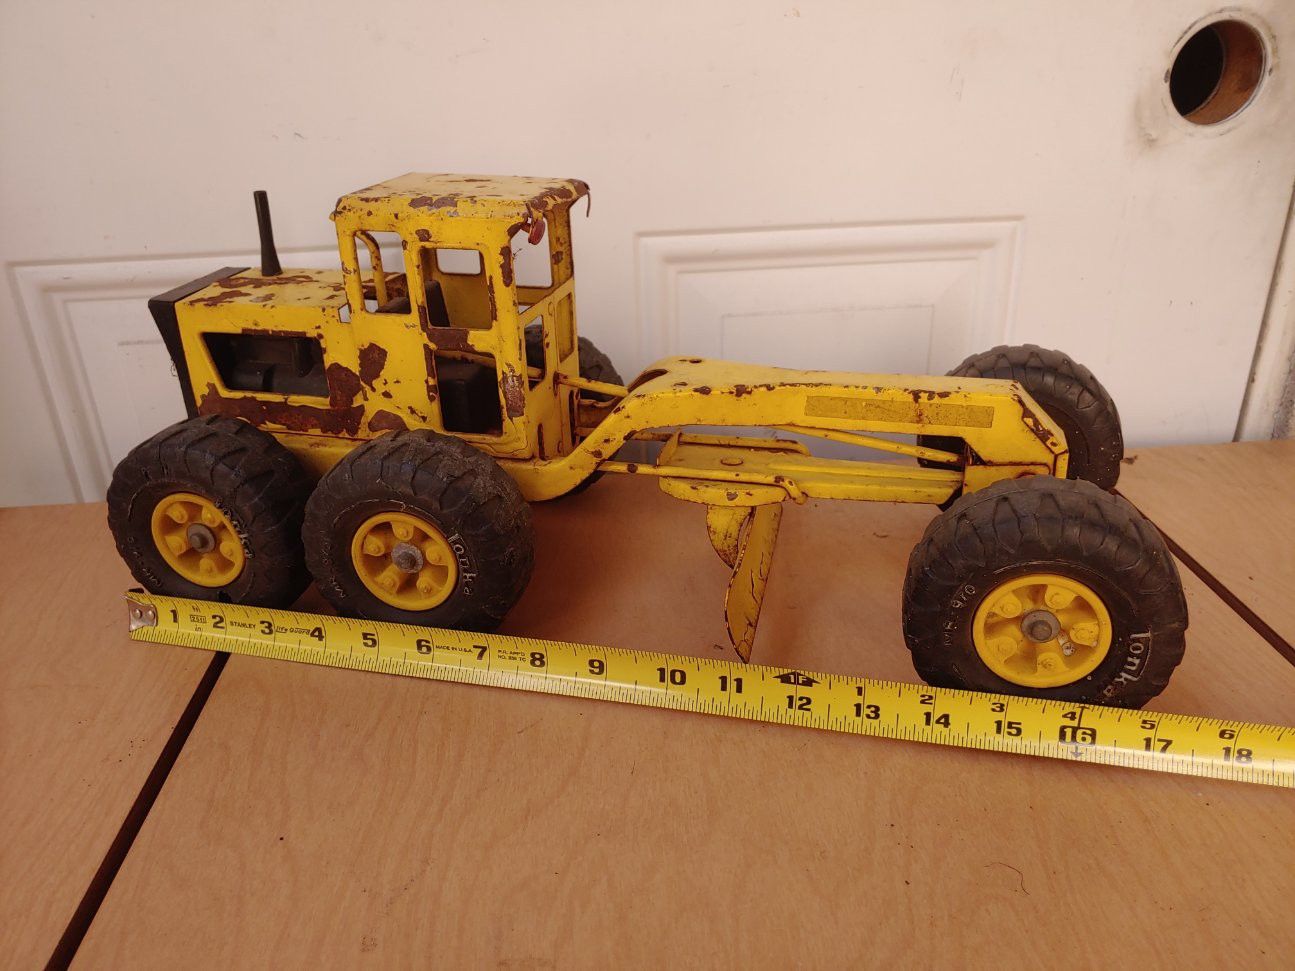 1970s TONKA truck Plow toy rusty patina. Works great